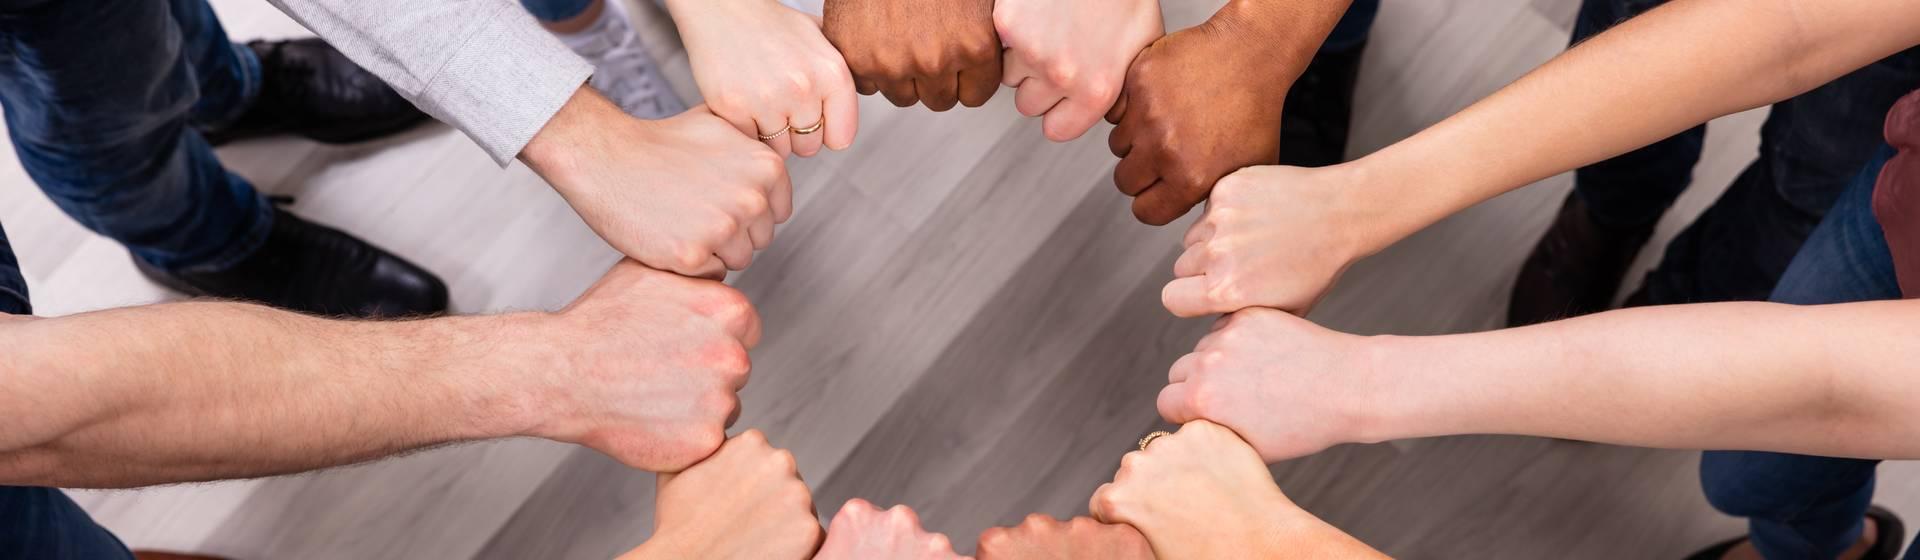 People Hands Joining Their Fist To Form Circle